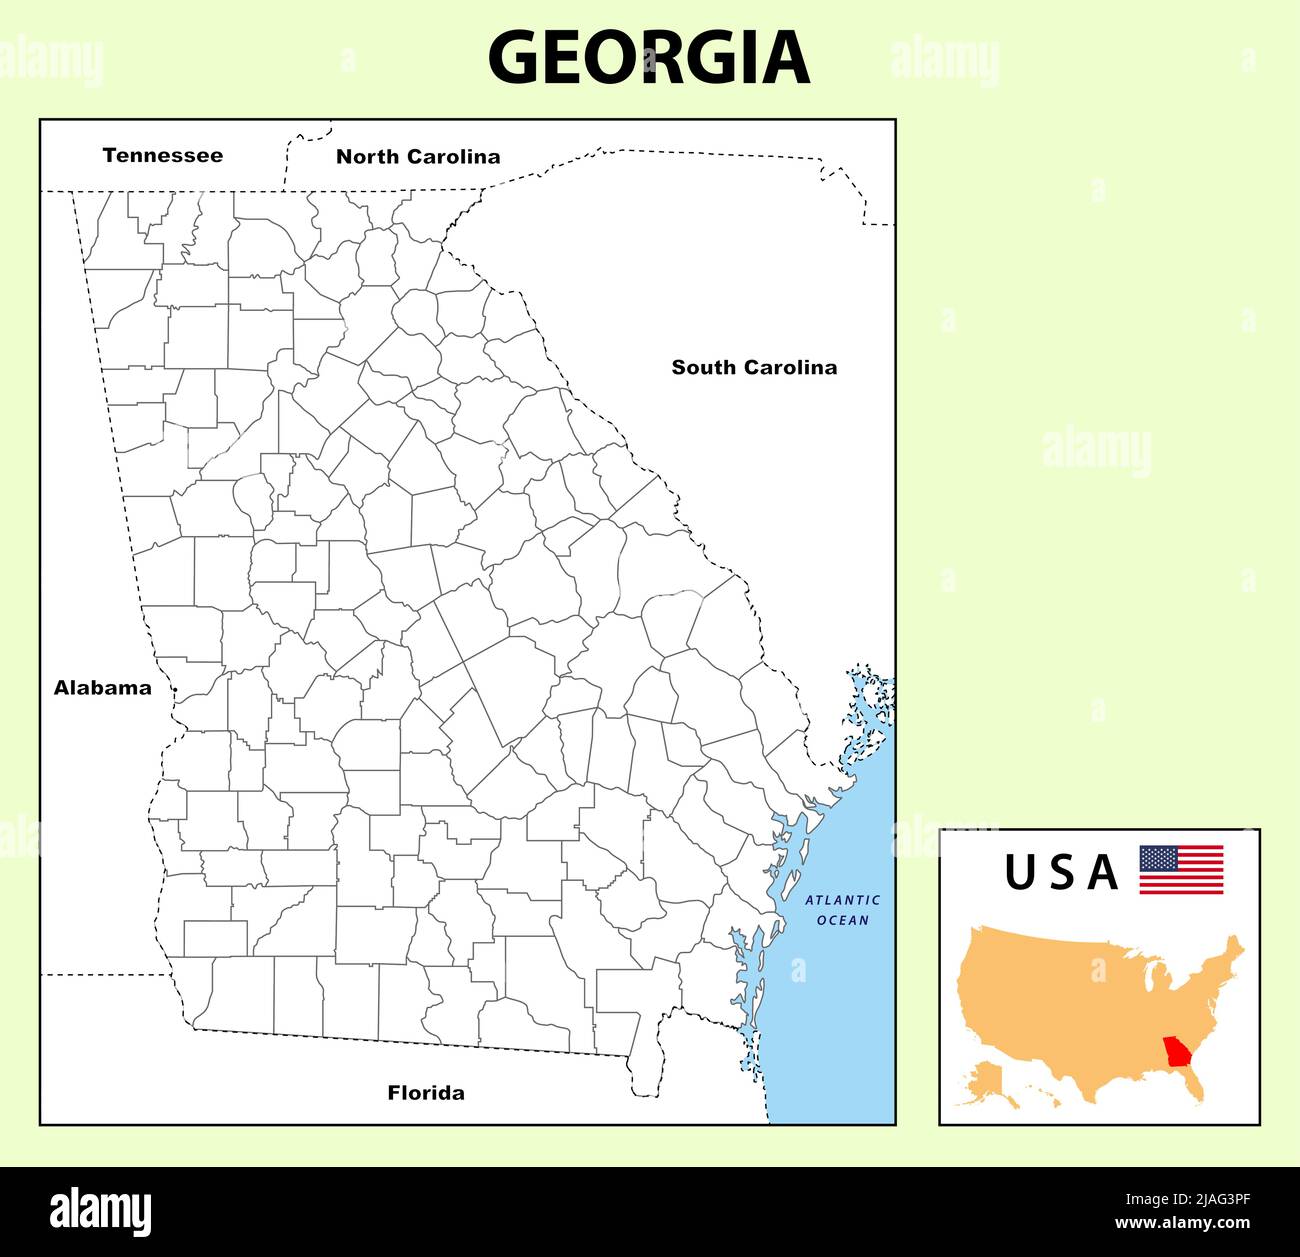 Georgia Map. Political map of Georgia with boundaries in Outline. Stock Vector